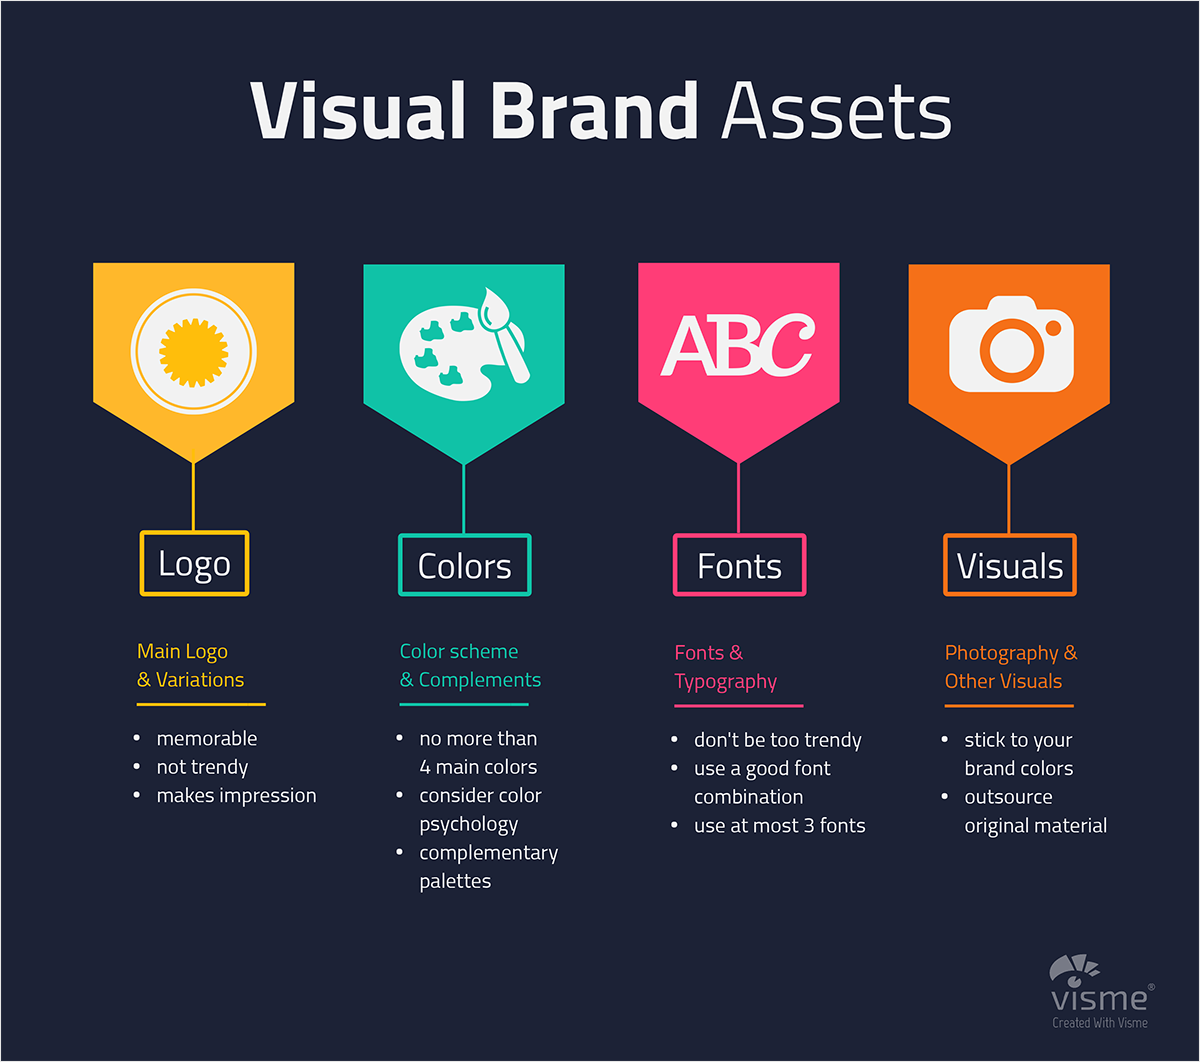 logo, colors, fonts, and visuals brand assets infographic